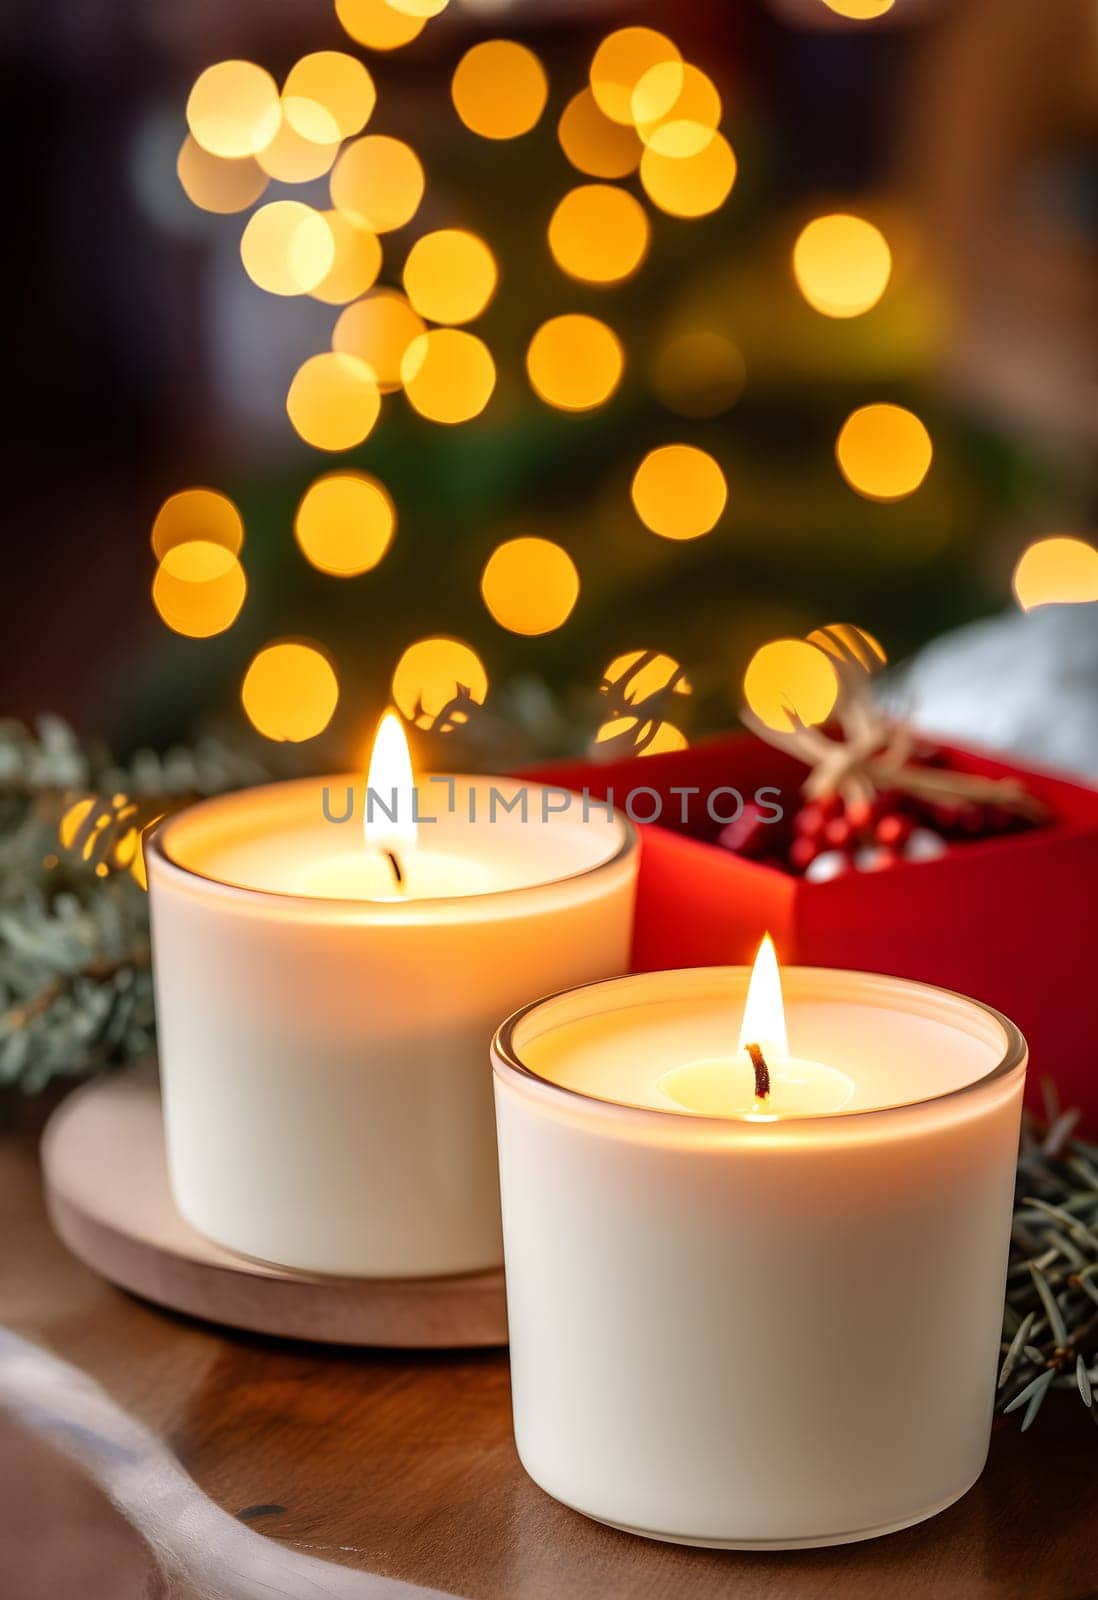 The warm glow of two wax candles on a table, evoking memories of christmas and creating a cozy ambiance by chrisroll